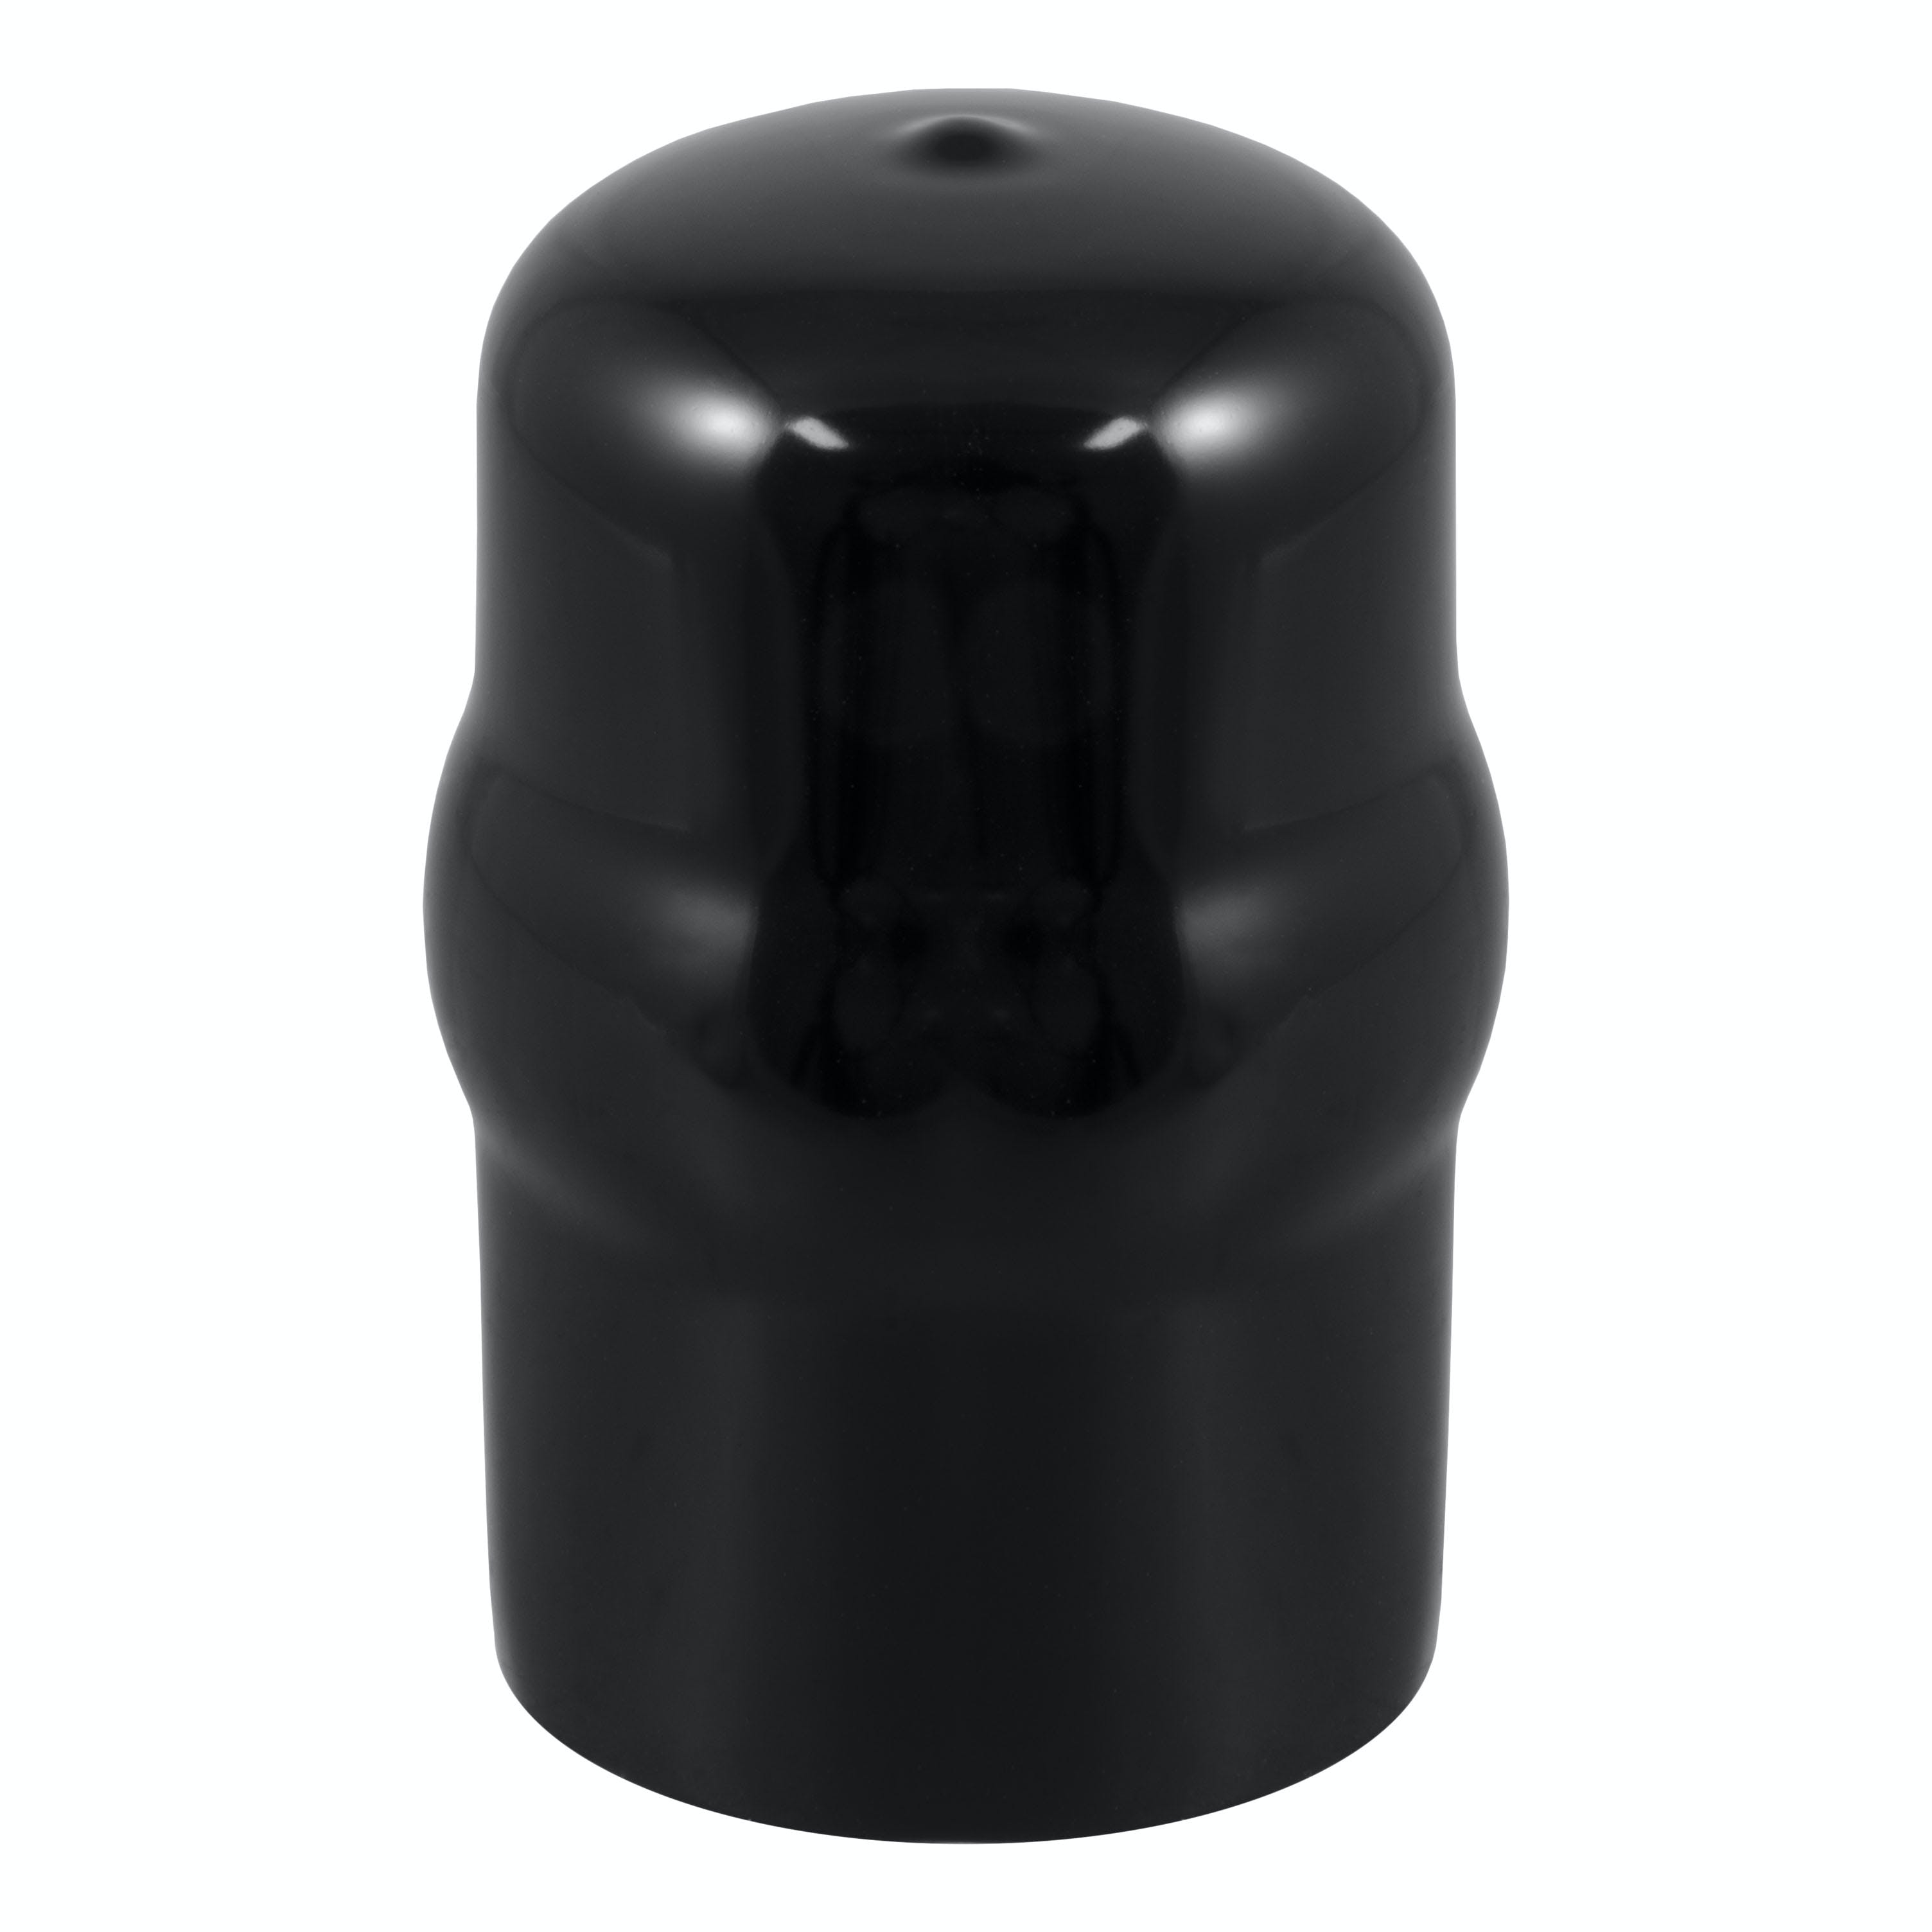 CURT 21801 Trailer Ball Cover (Fits 1-7/8 or 2 Balls, Black Rubber, Packaged)